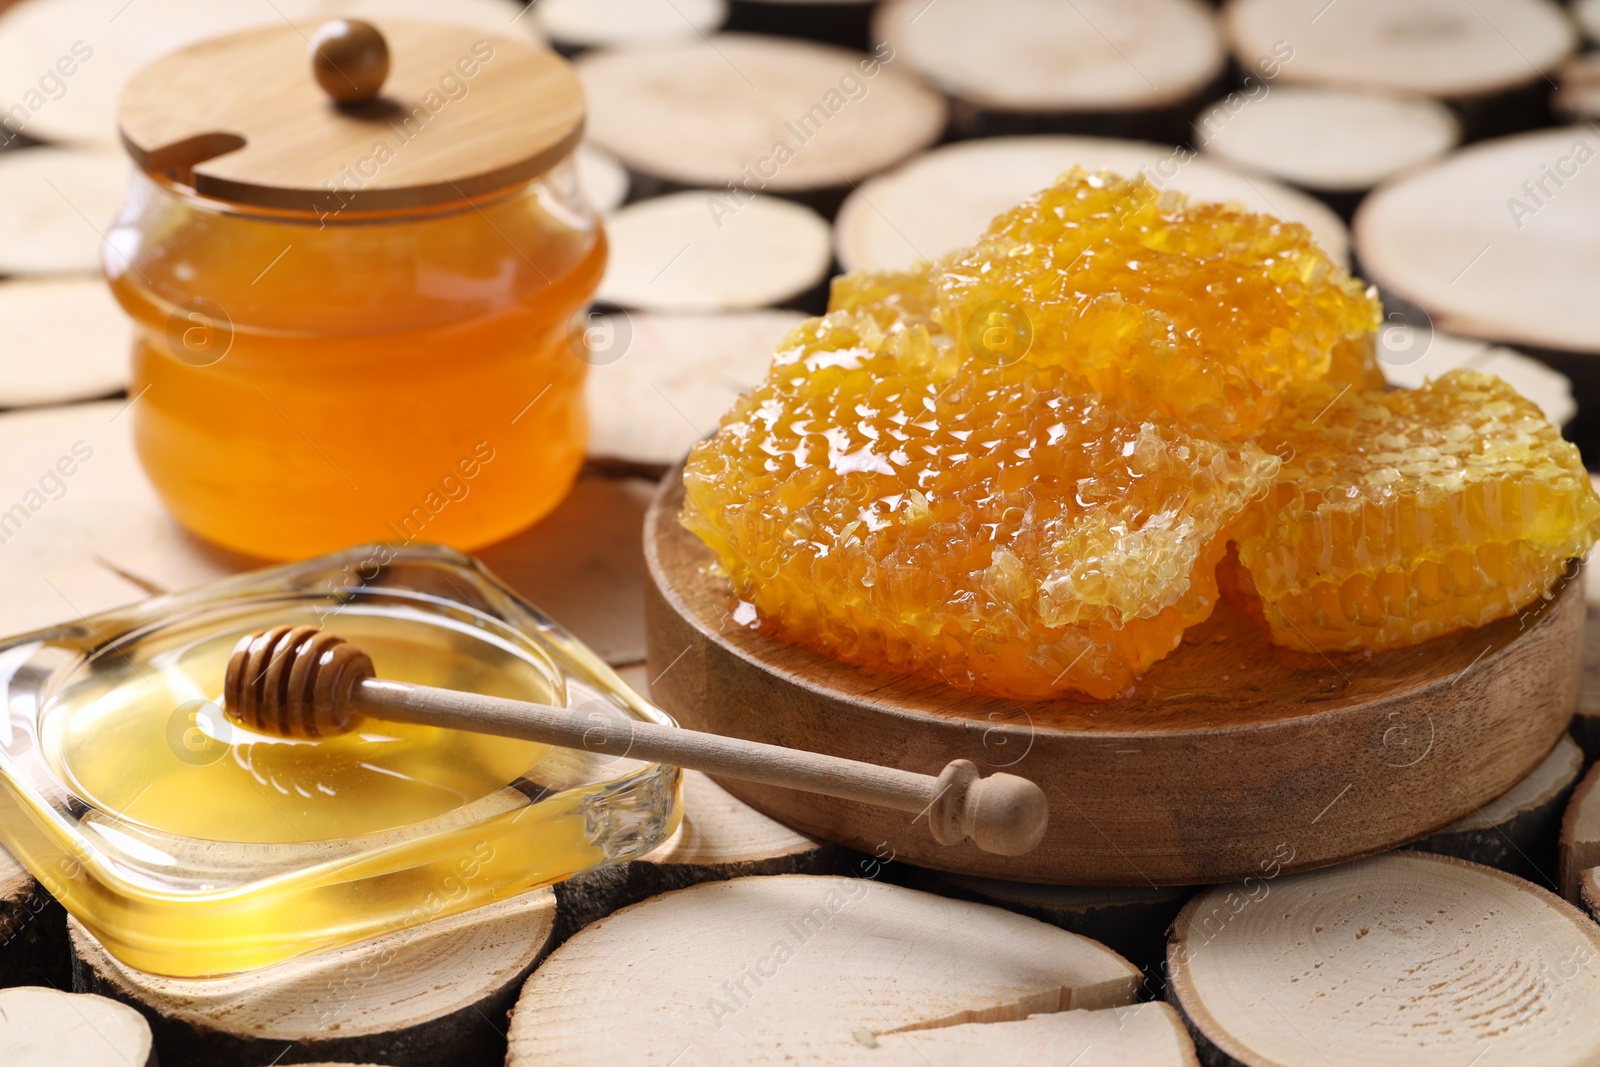 Photo of Natural honeycombs with honey and wooden dipper on textured table, closeup